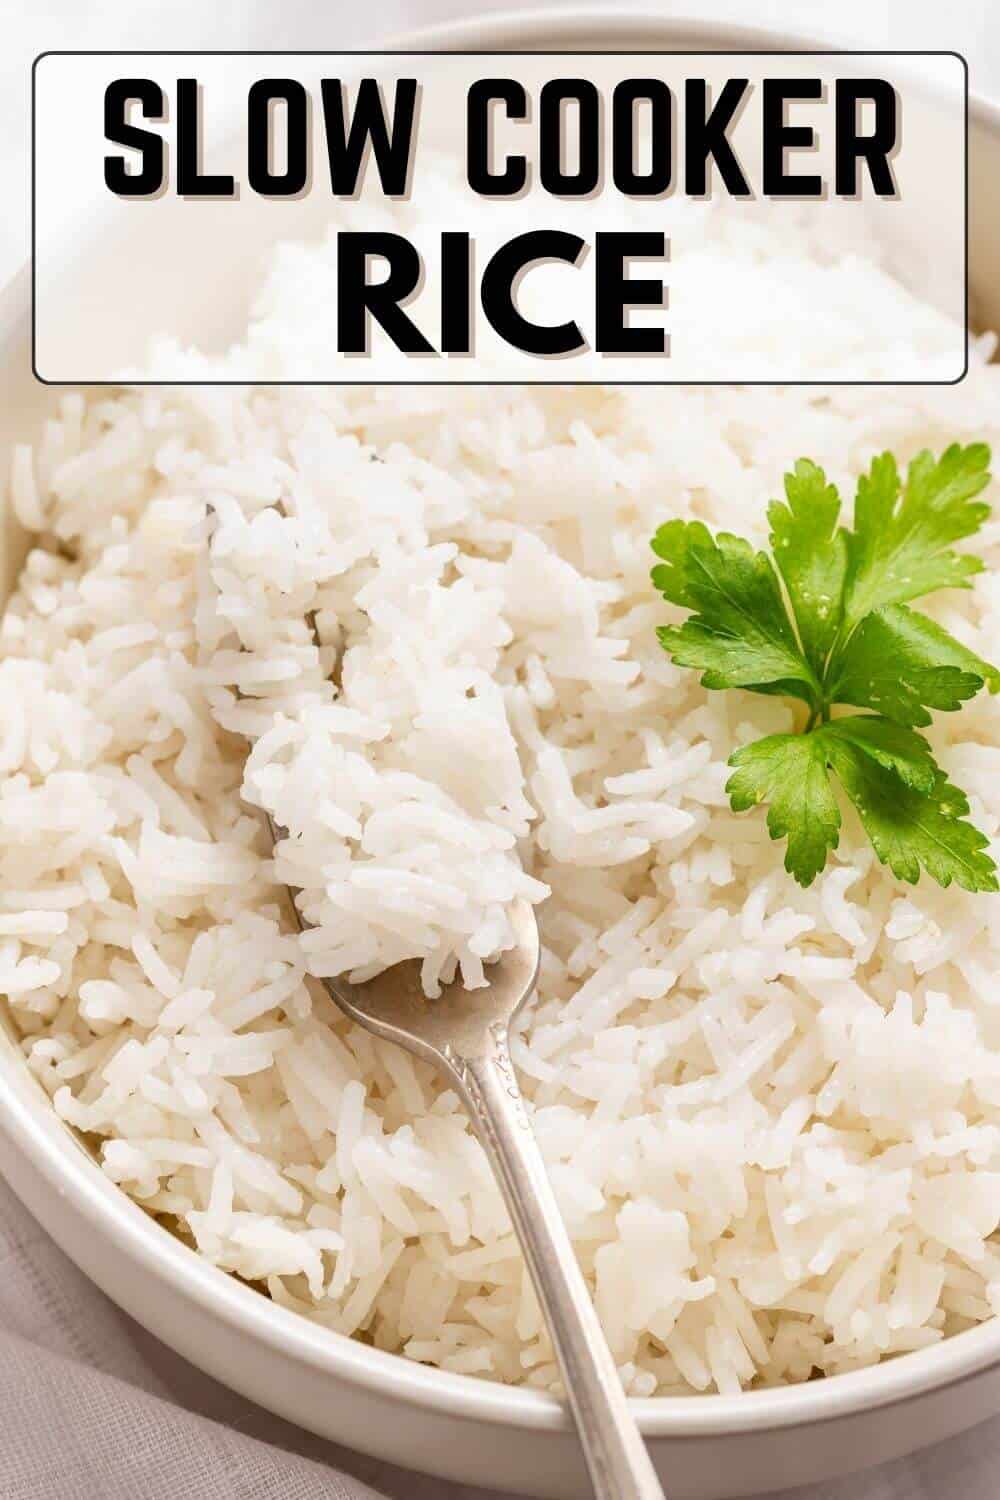 A bowl of rice with the text slow cooker rice.